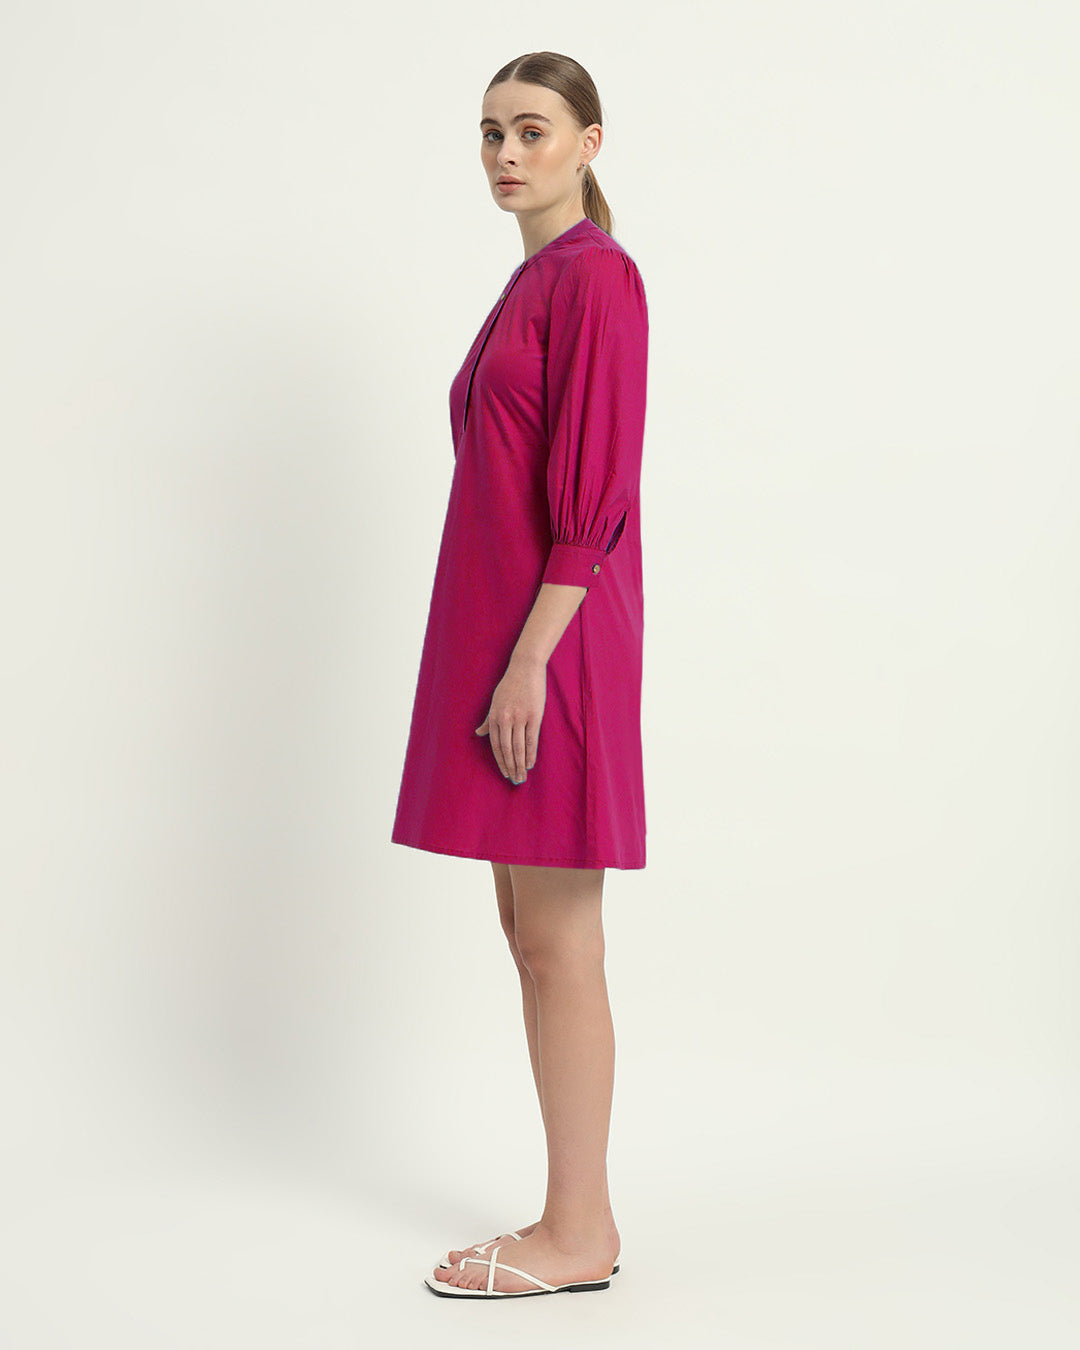 The Berry Roslyn Cotton Dress